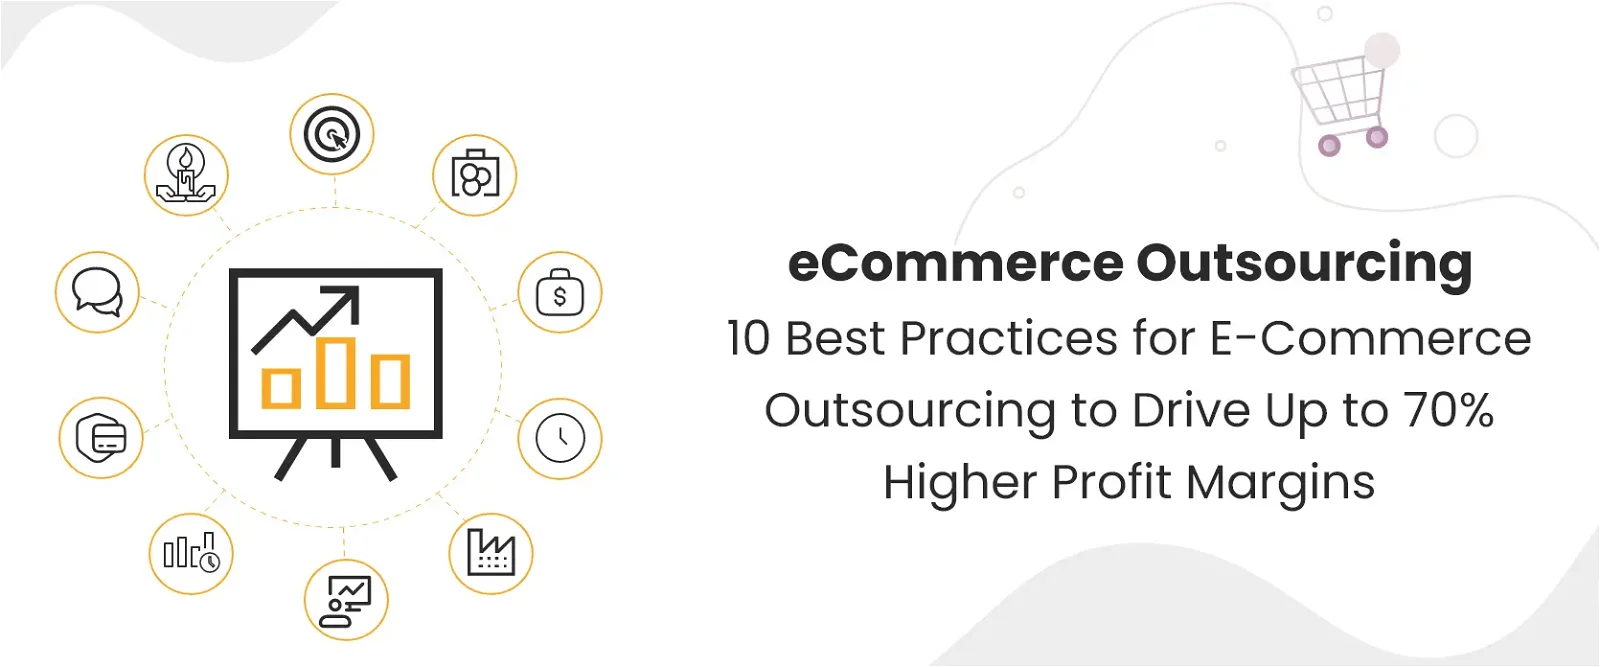 Best Practices for eCommerce Outsourcing